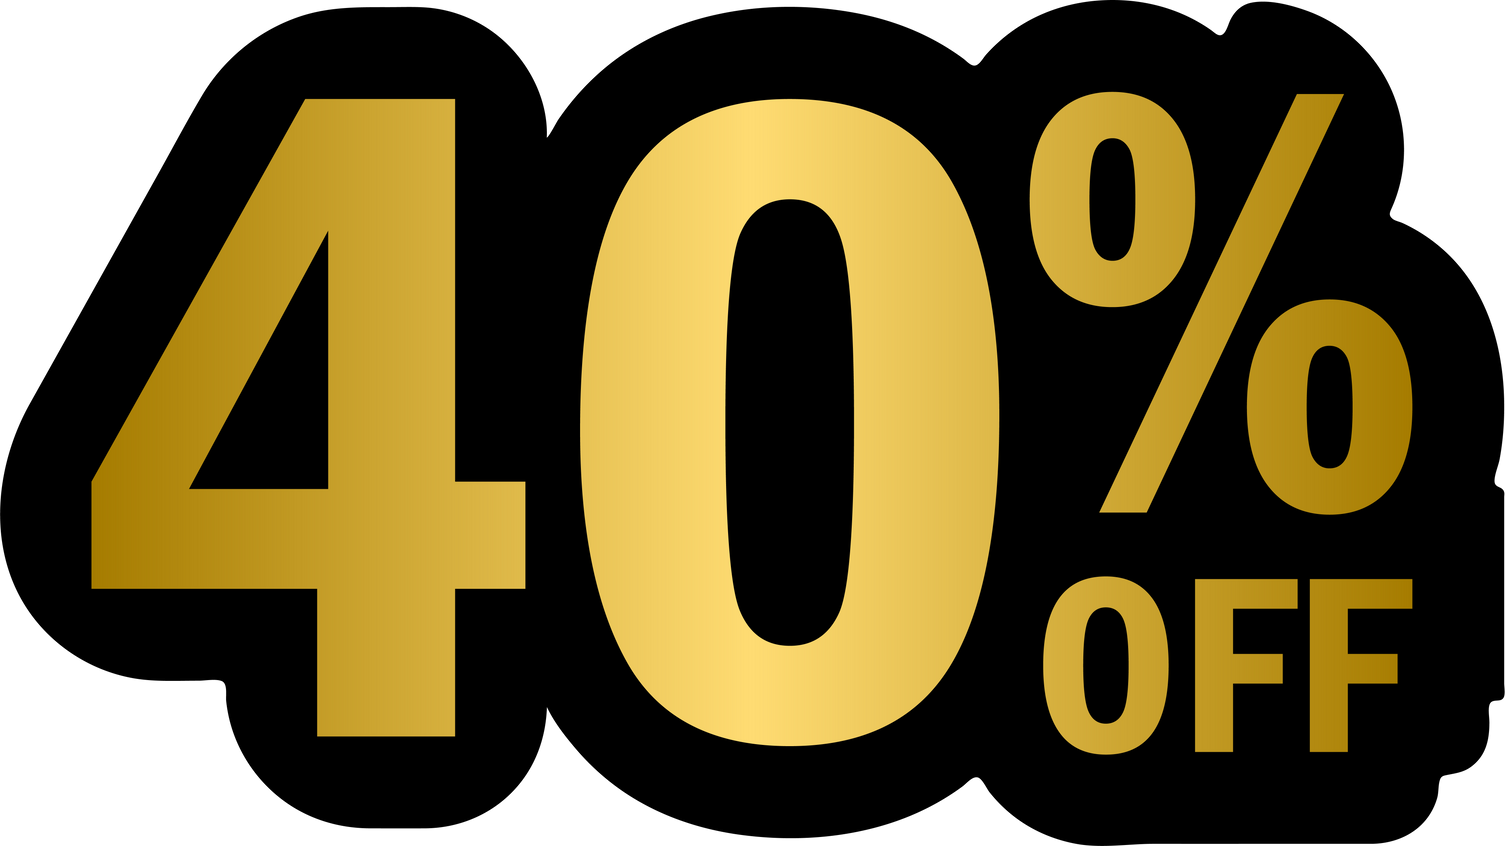 Discount 40% off golden tag